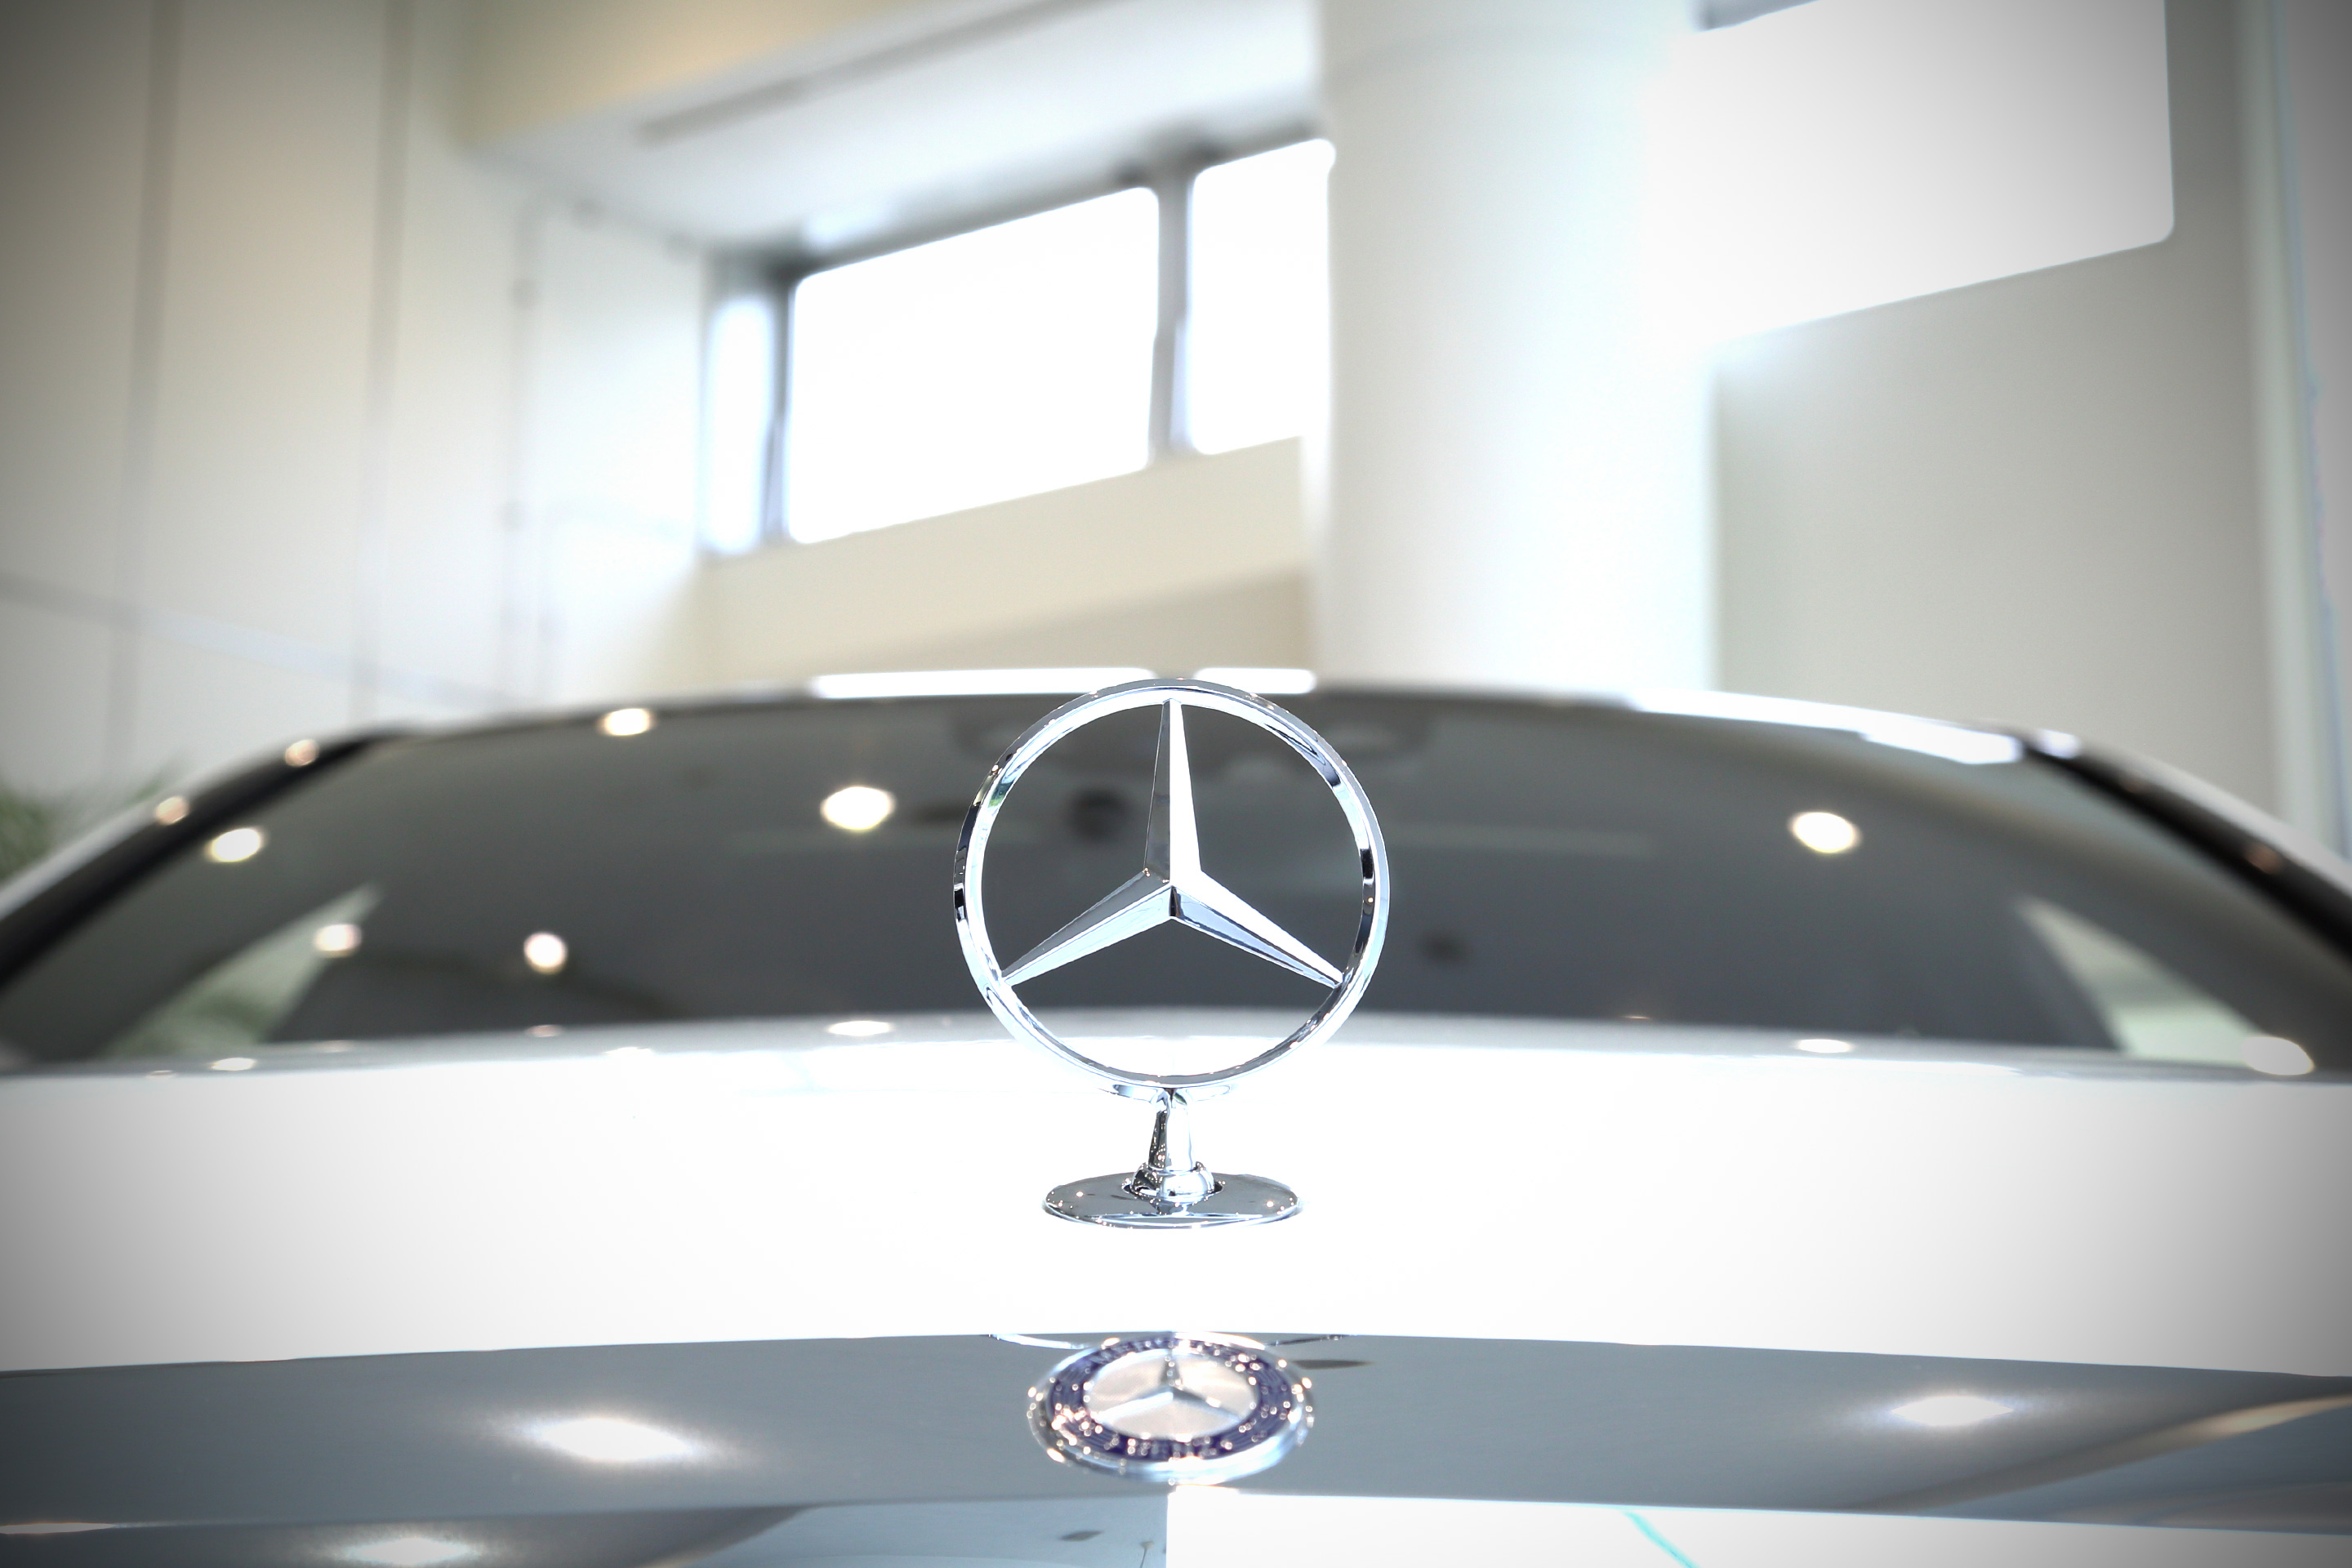 The origins of Mercedes' three-pointed star logo